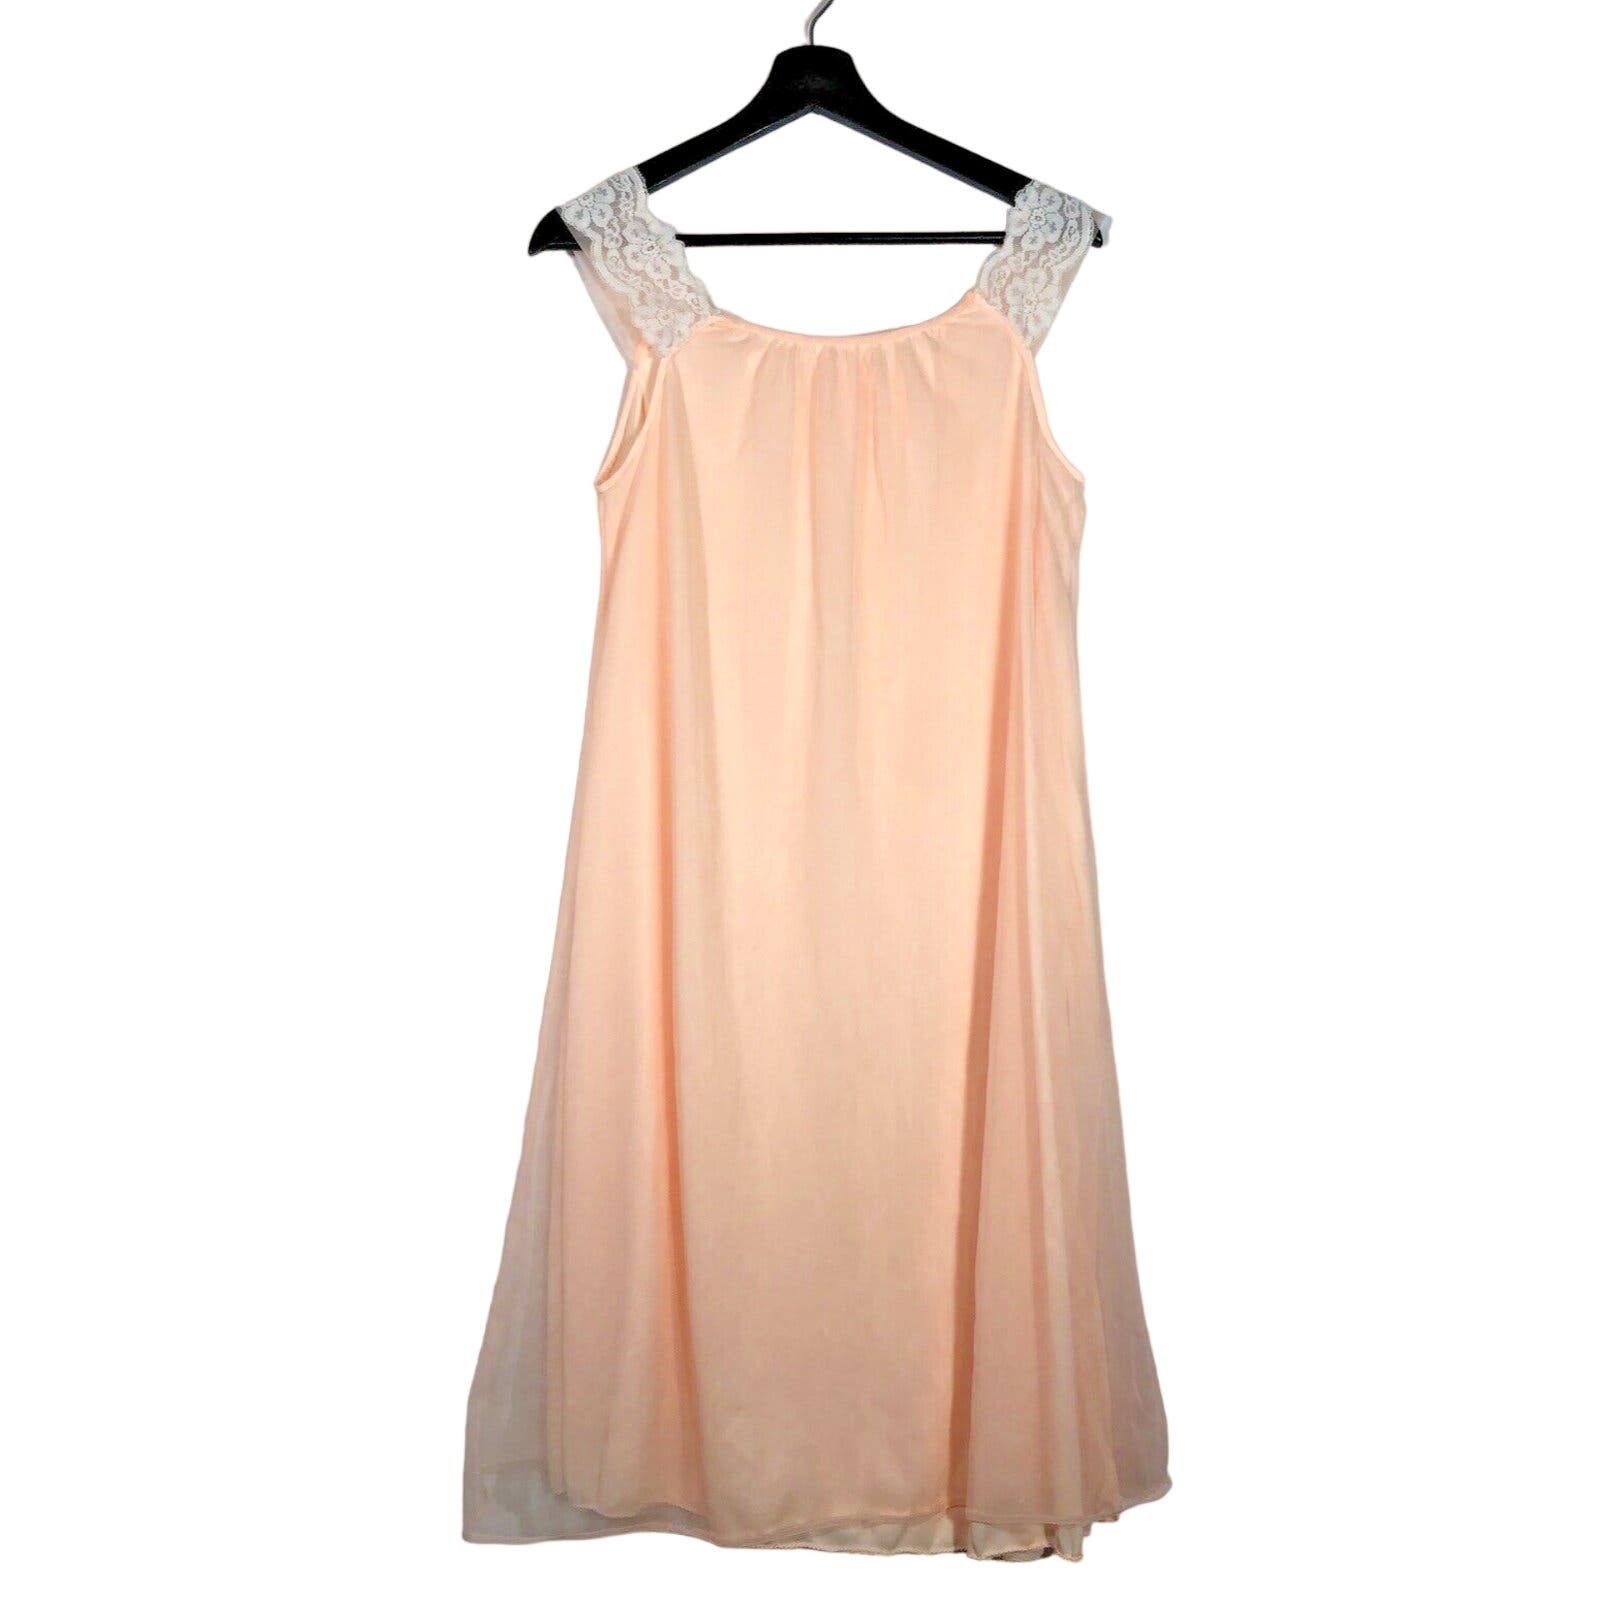 Vintage Vintage Peach and Pink Lace and Chiffon NightGown Dress S Size S / US 4 / IT 40 - 6 Thumbnail